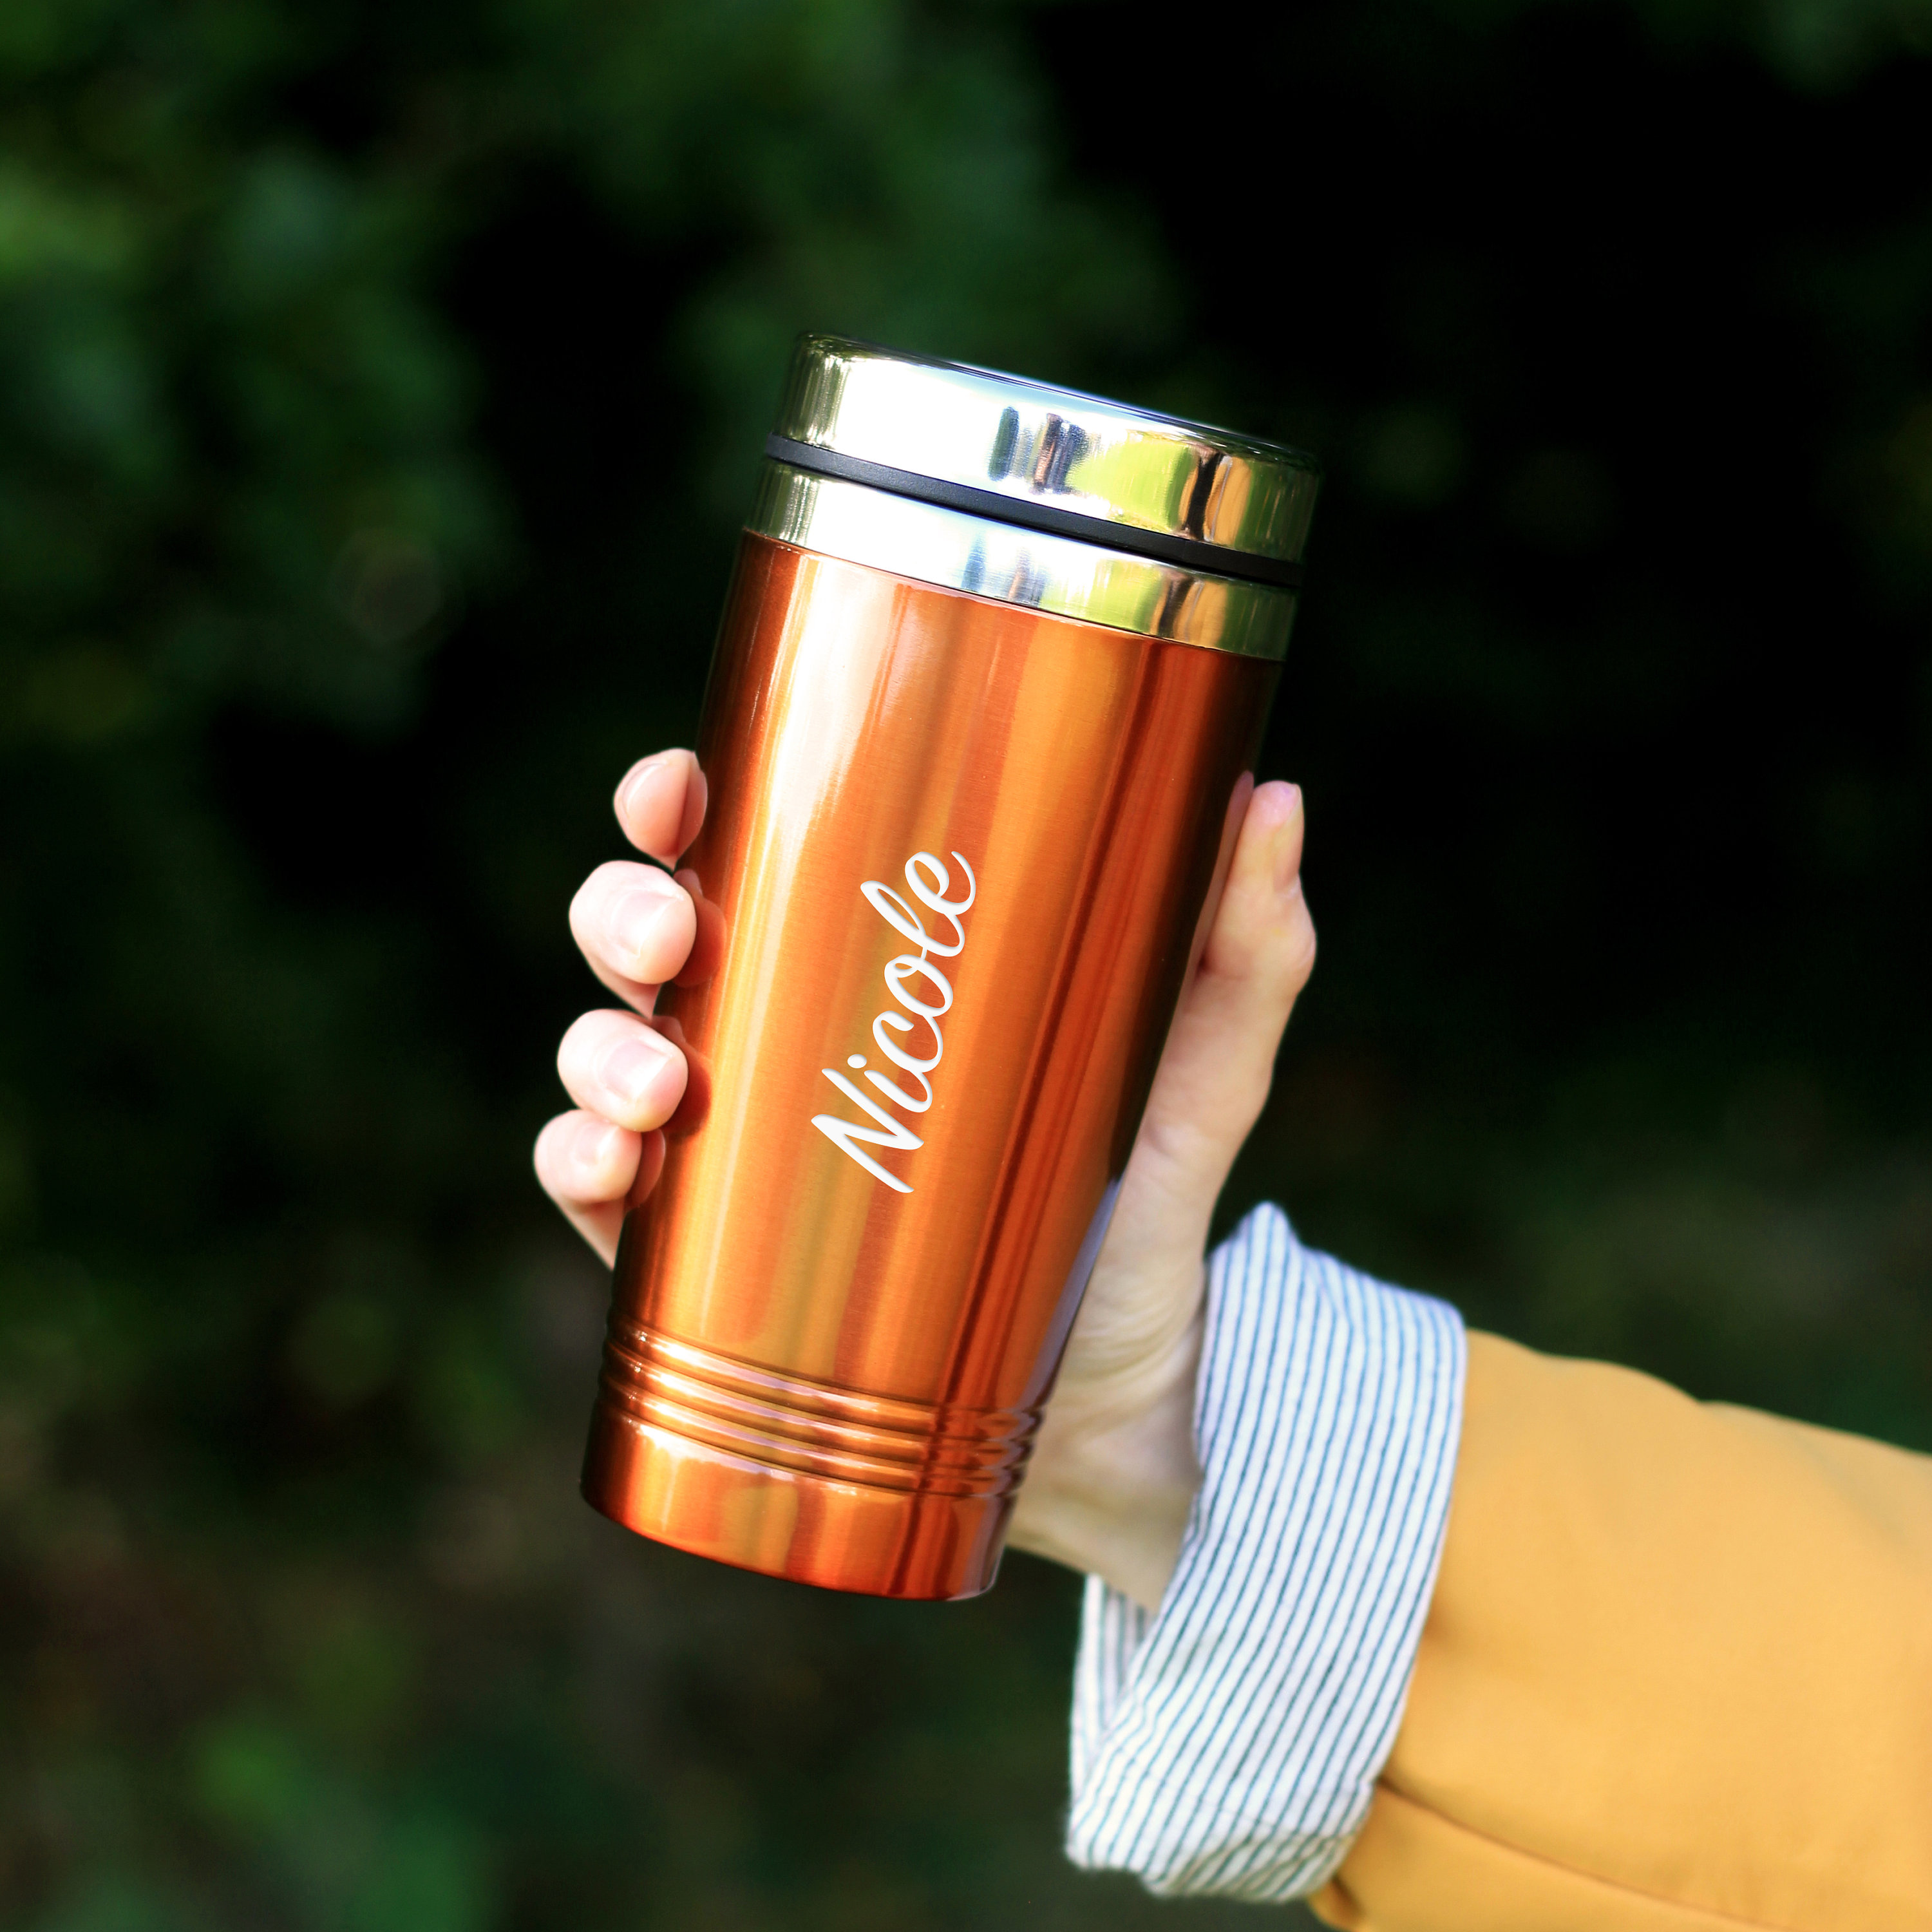 Buy Personalised Travel Hot & Cold Mug, Reusable Coffee Cup